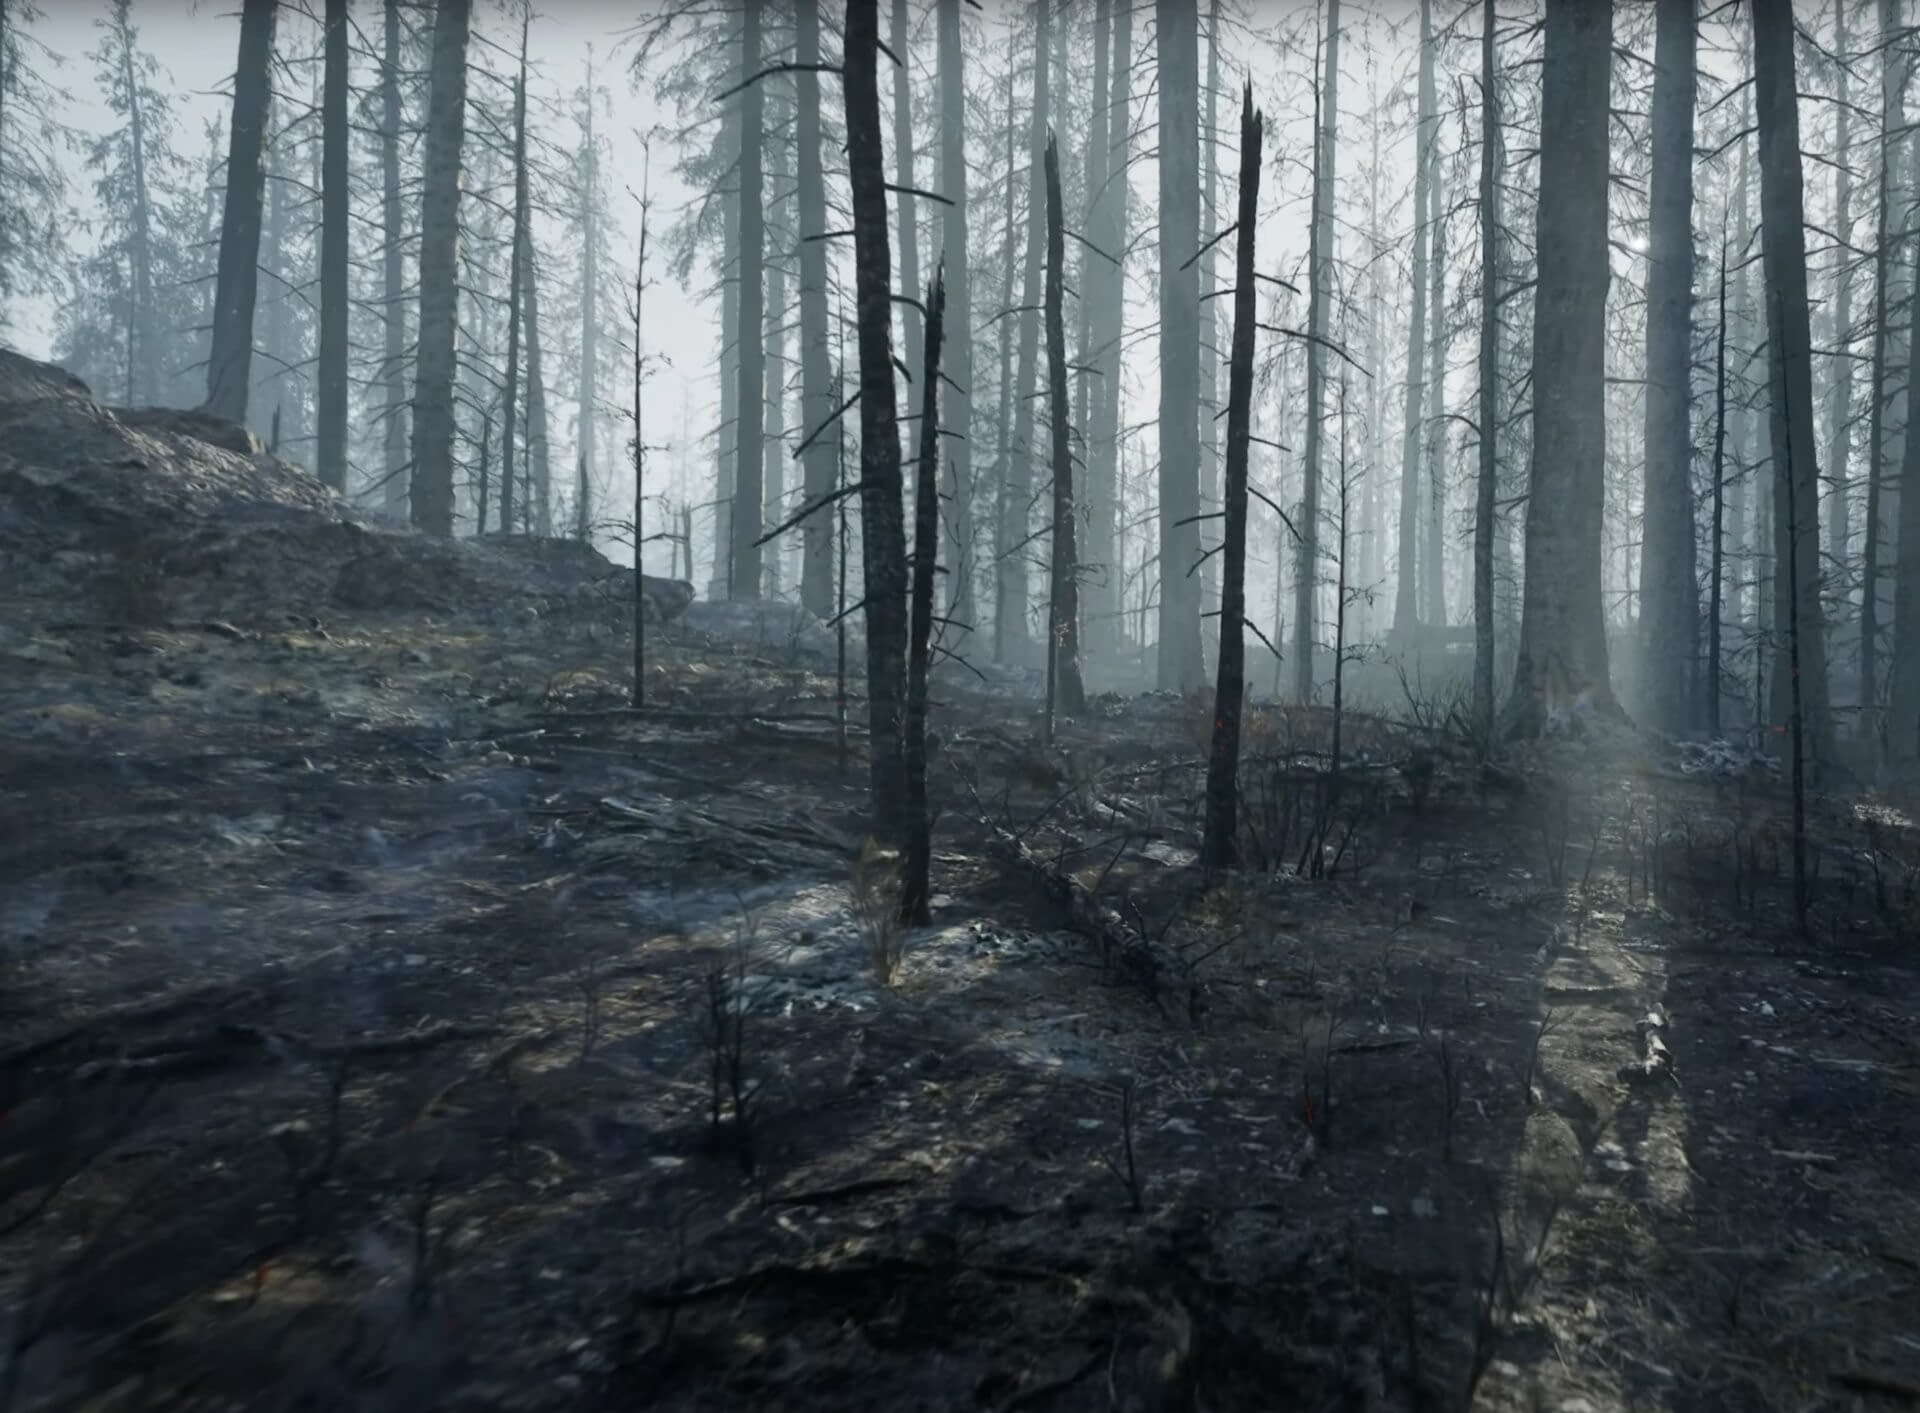 The demo released for Unreal Engine 5 to step into the burning forest